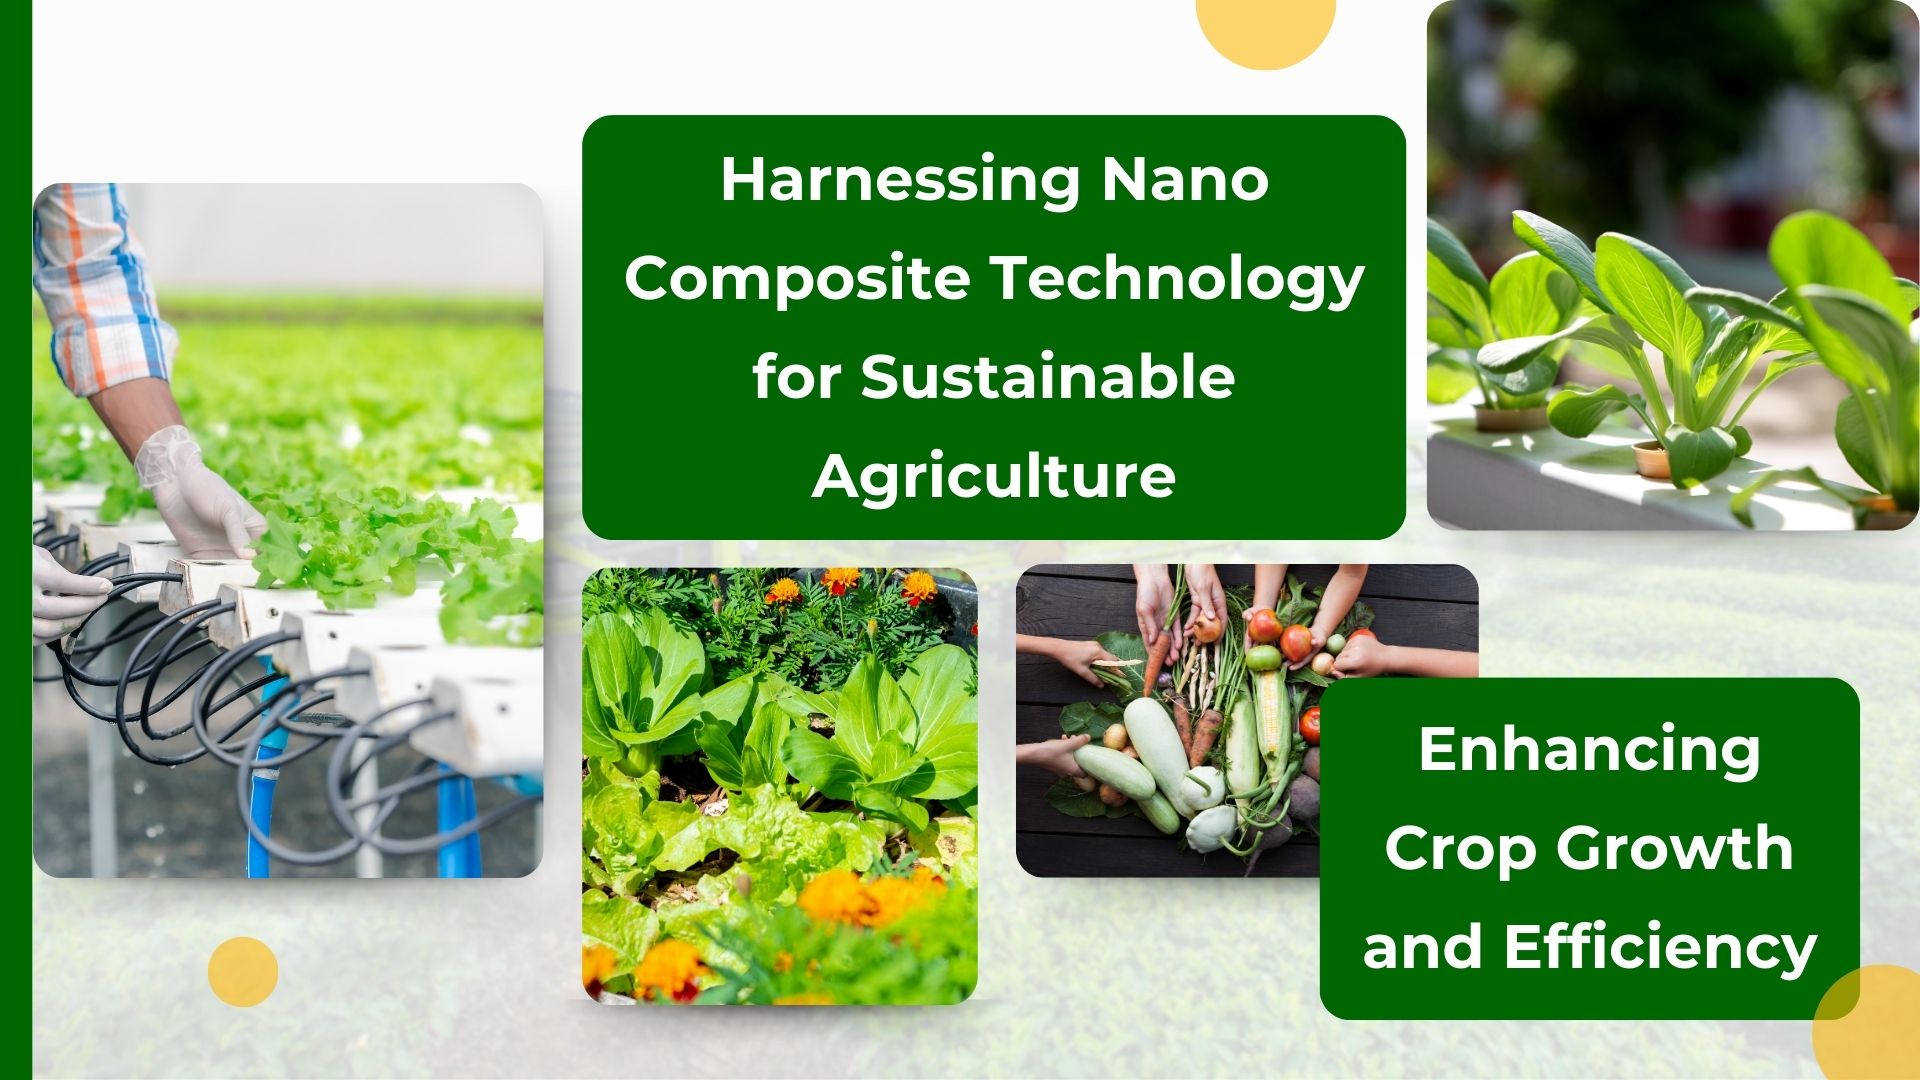 Harnessing Nano Composite Technology for Sustainable Agriculture: Enhancing Crop Growth and Efficiency